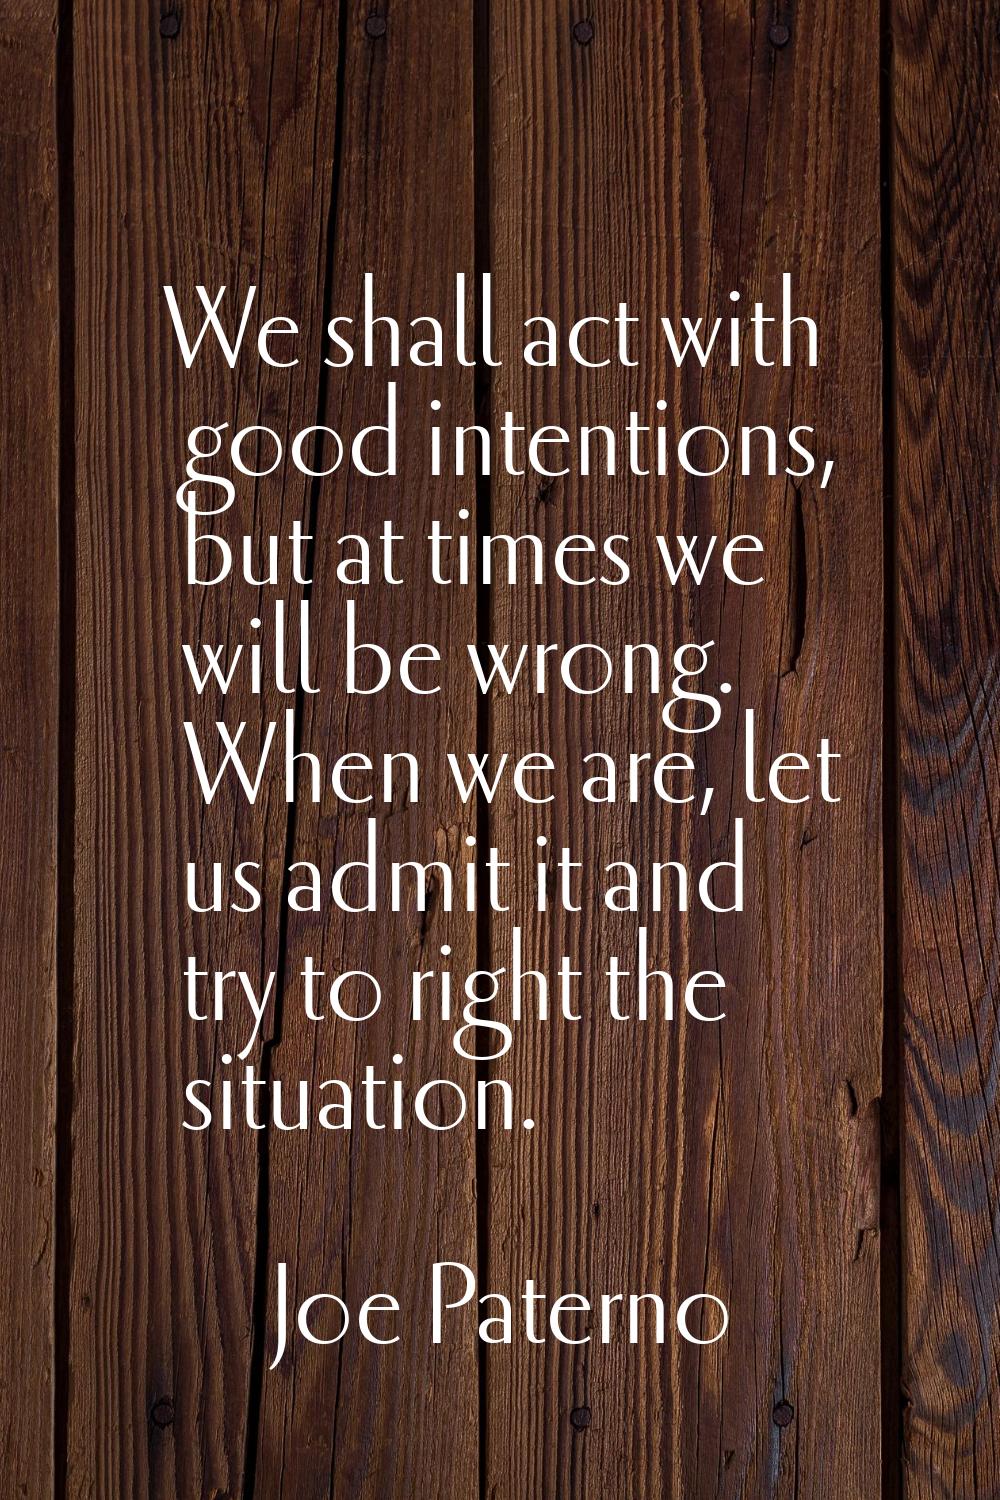 We shall act with good intentions, but at times we will be wrong. When we are, let us admit it and 